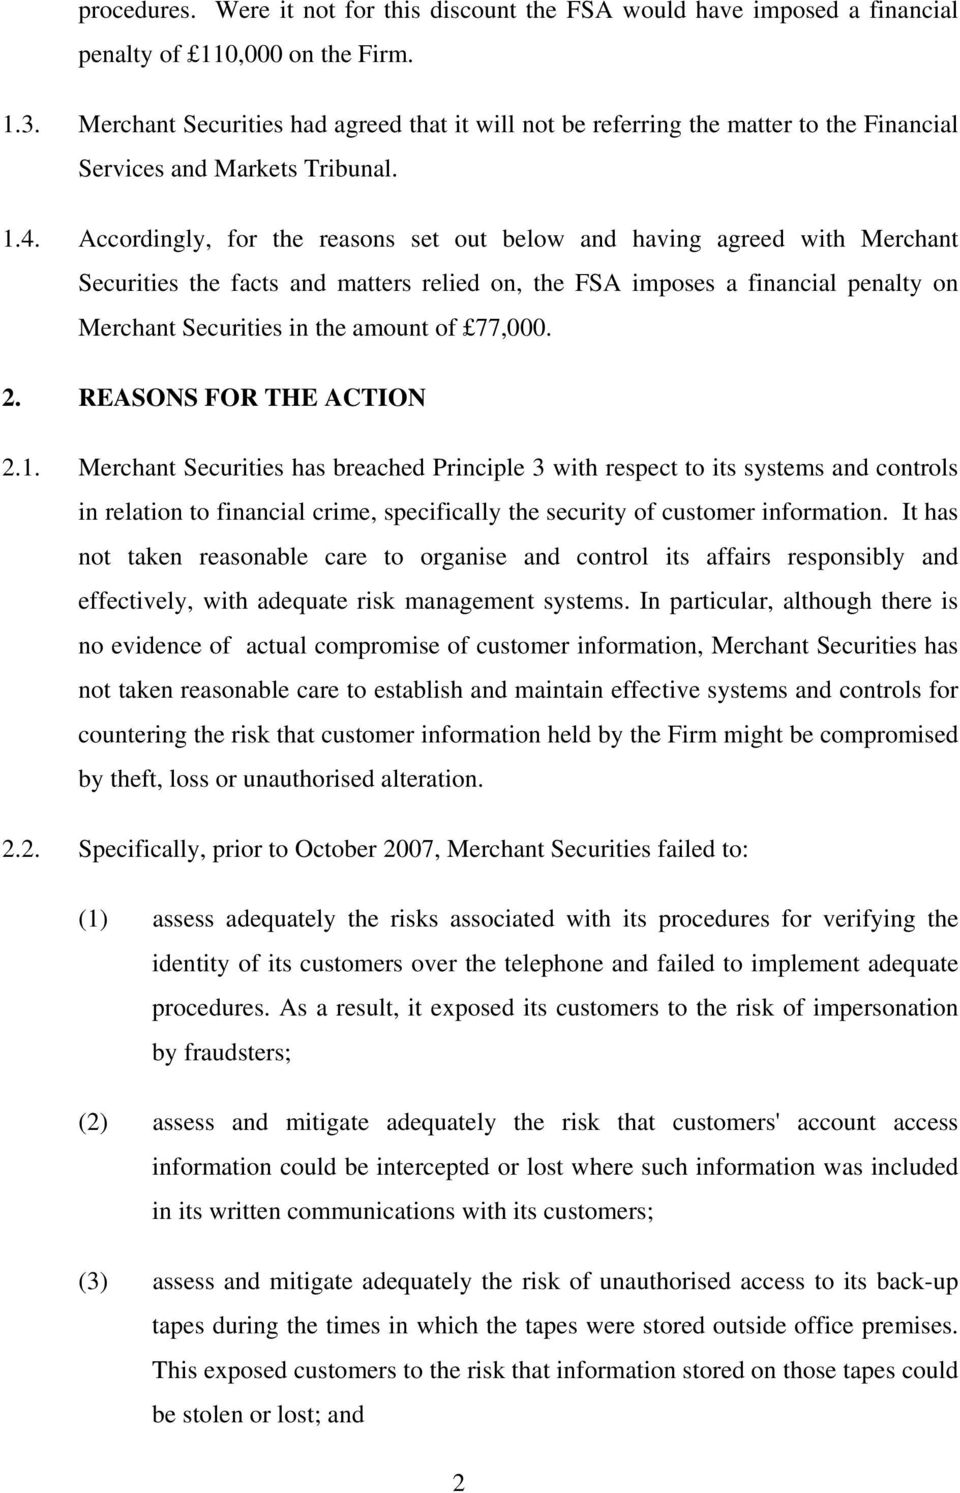 Accordingly, for the reasons set out below and having agreed with Merchant Securities the facts and matters relied on, the FSA imposes a financial penalty on Merchant Securities in the amount of